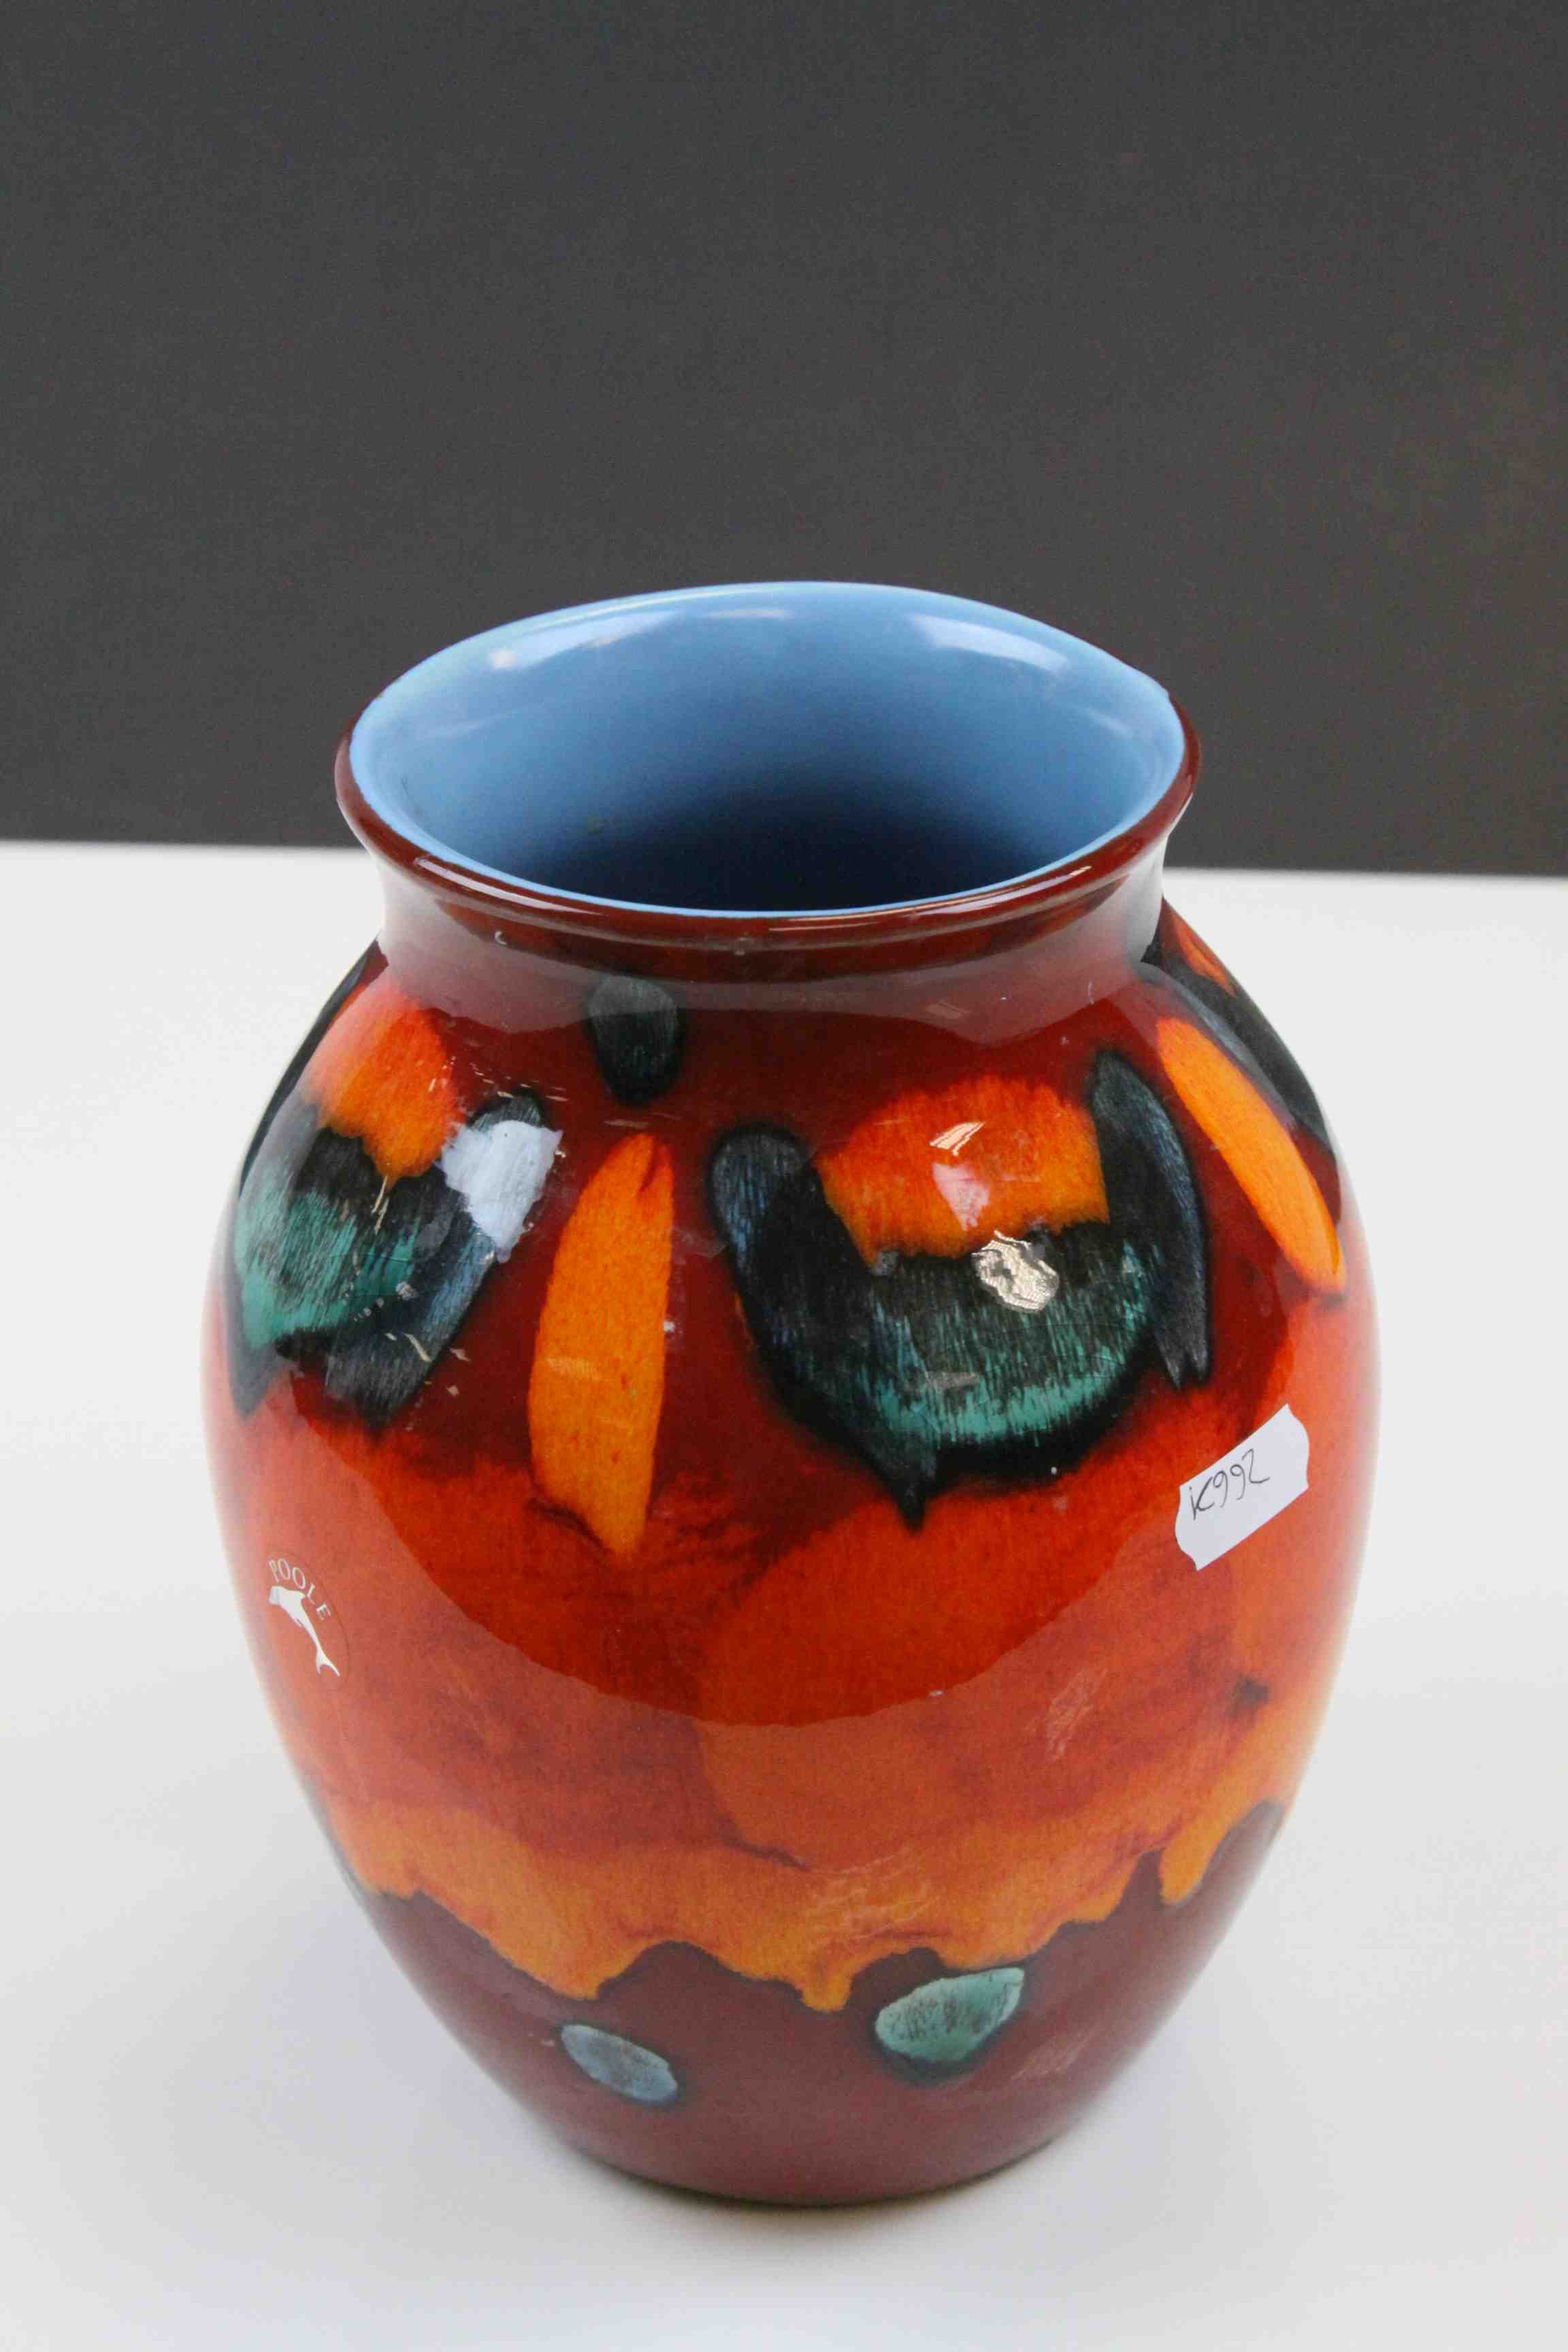 Poole Pottery vase in bright Orange & Red colours and pale Blue interior